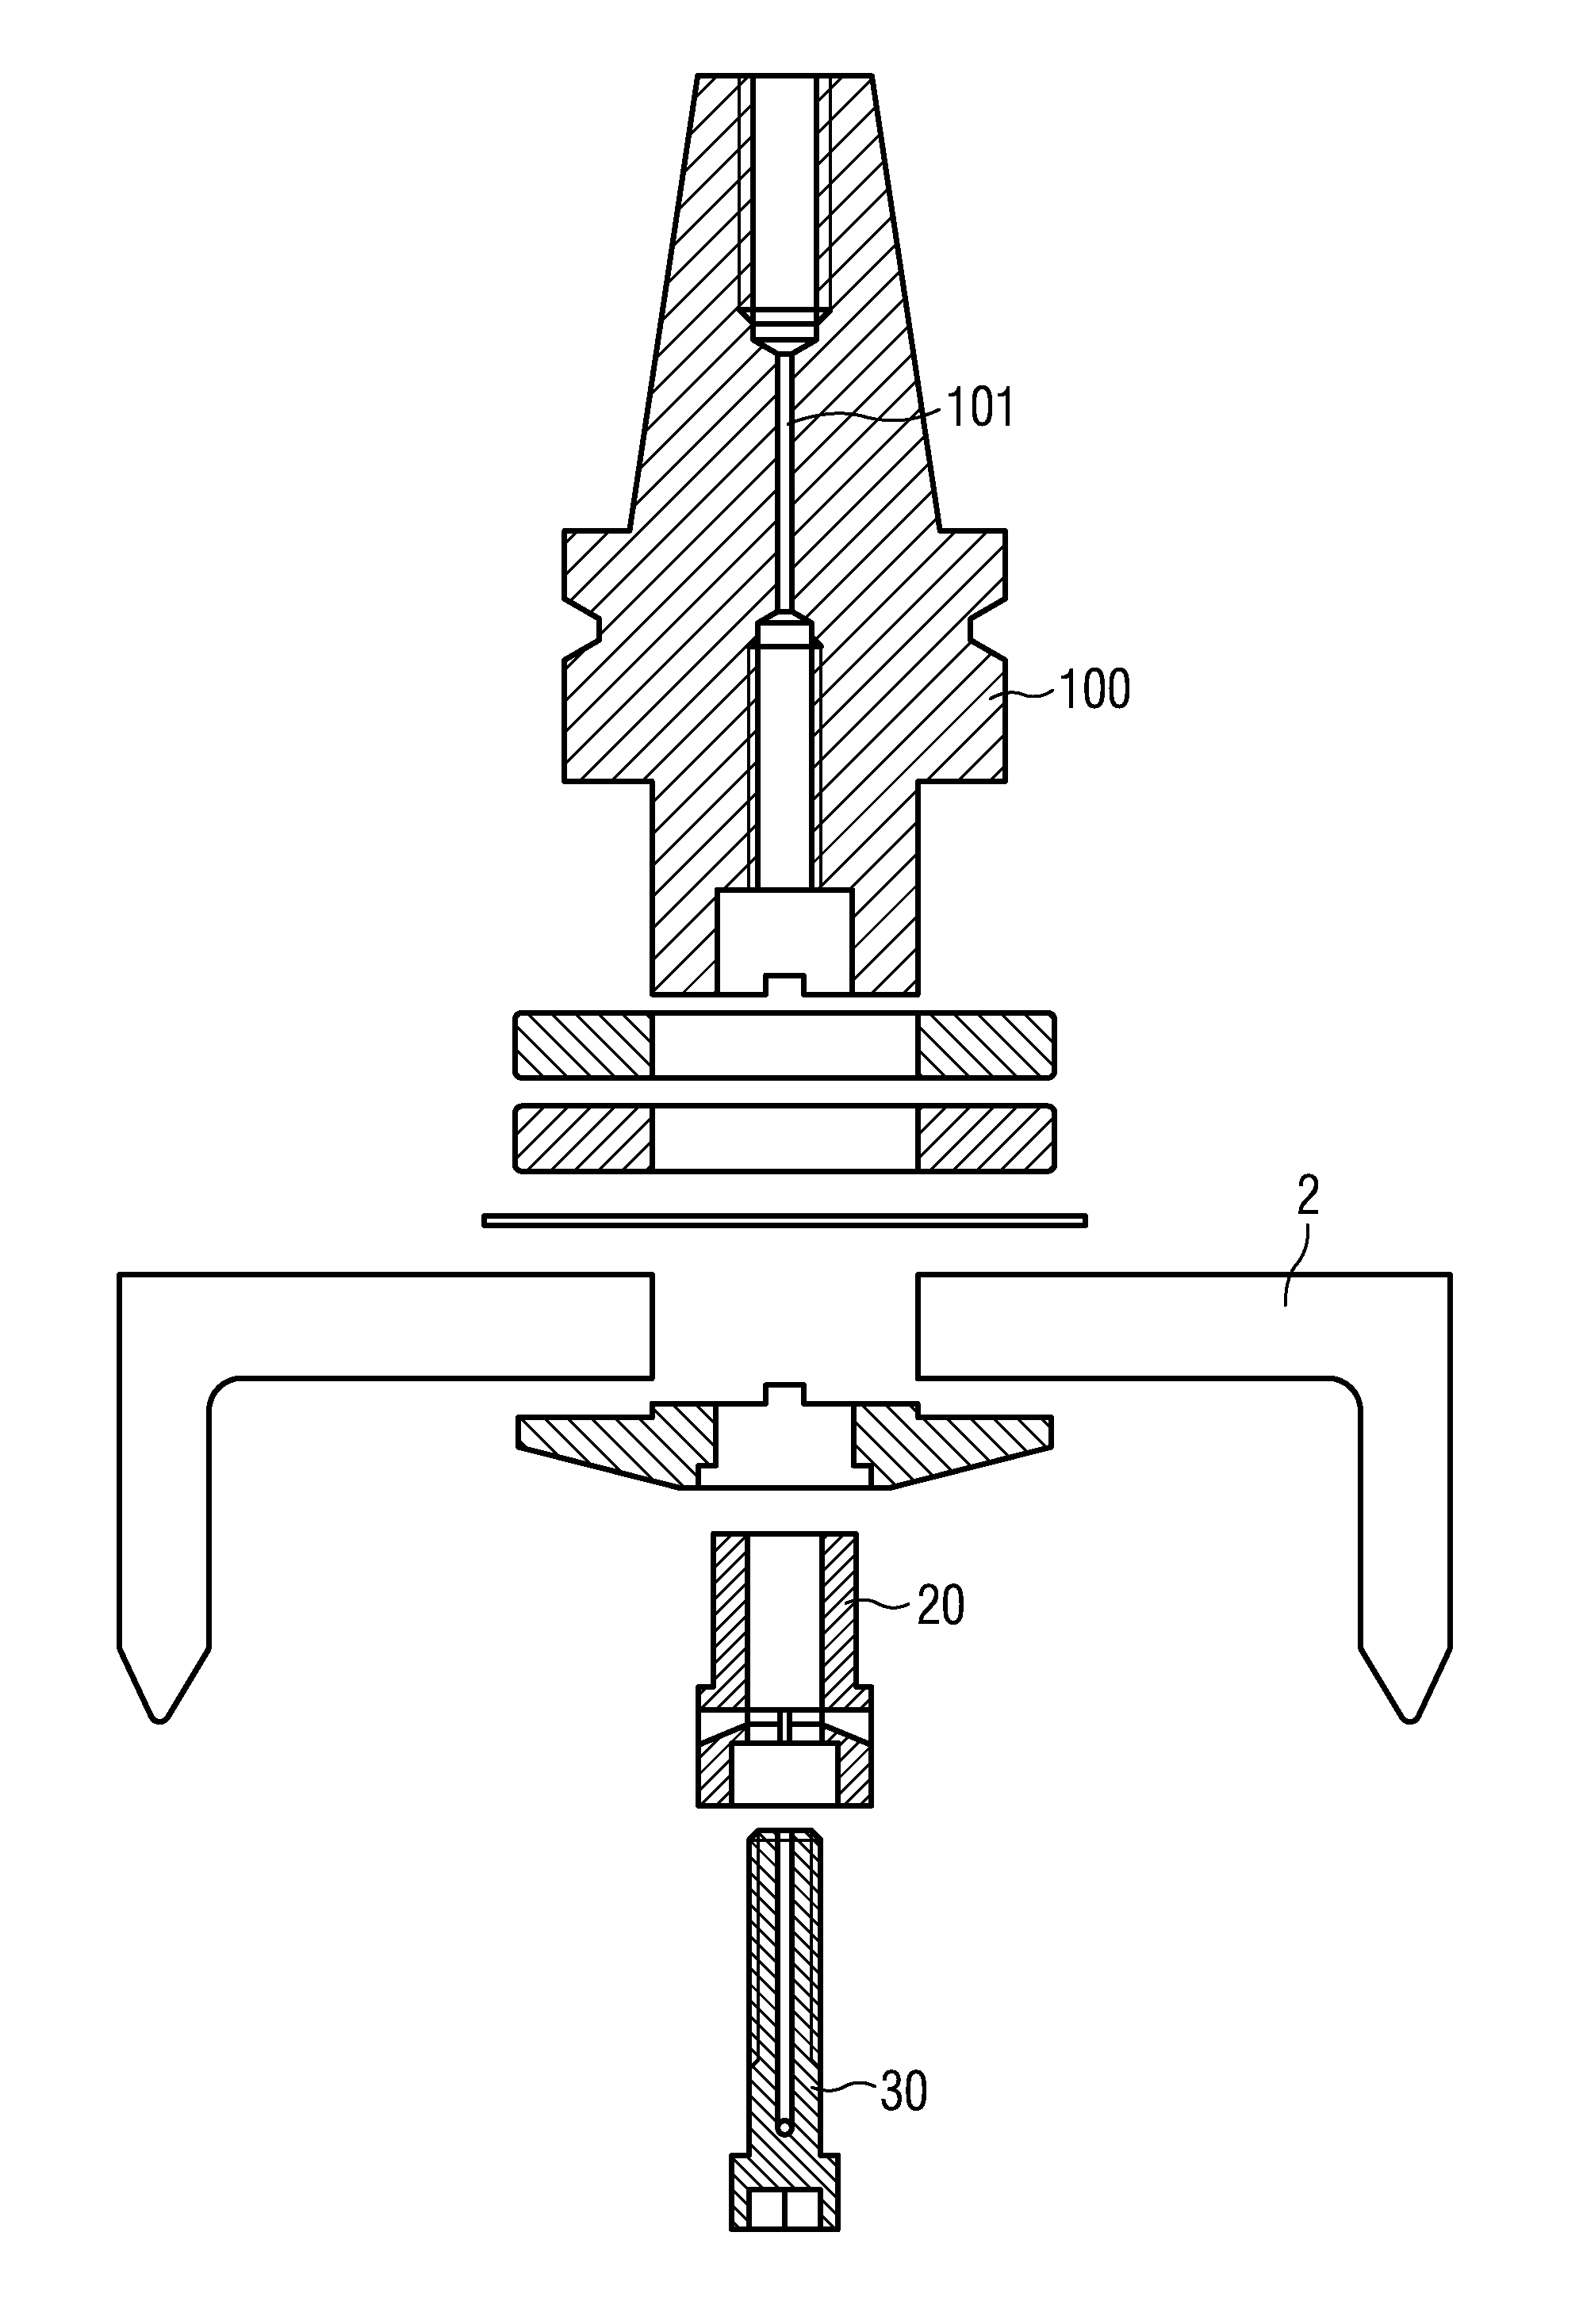 Through coolant adaptor for use on hollow spindle machine tools